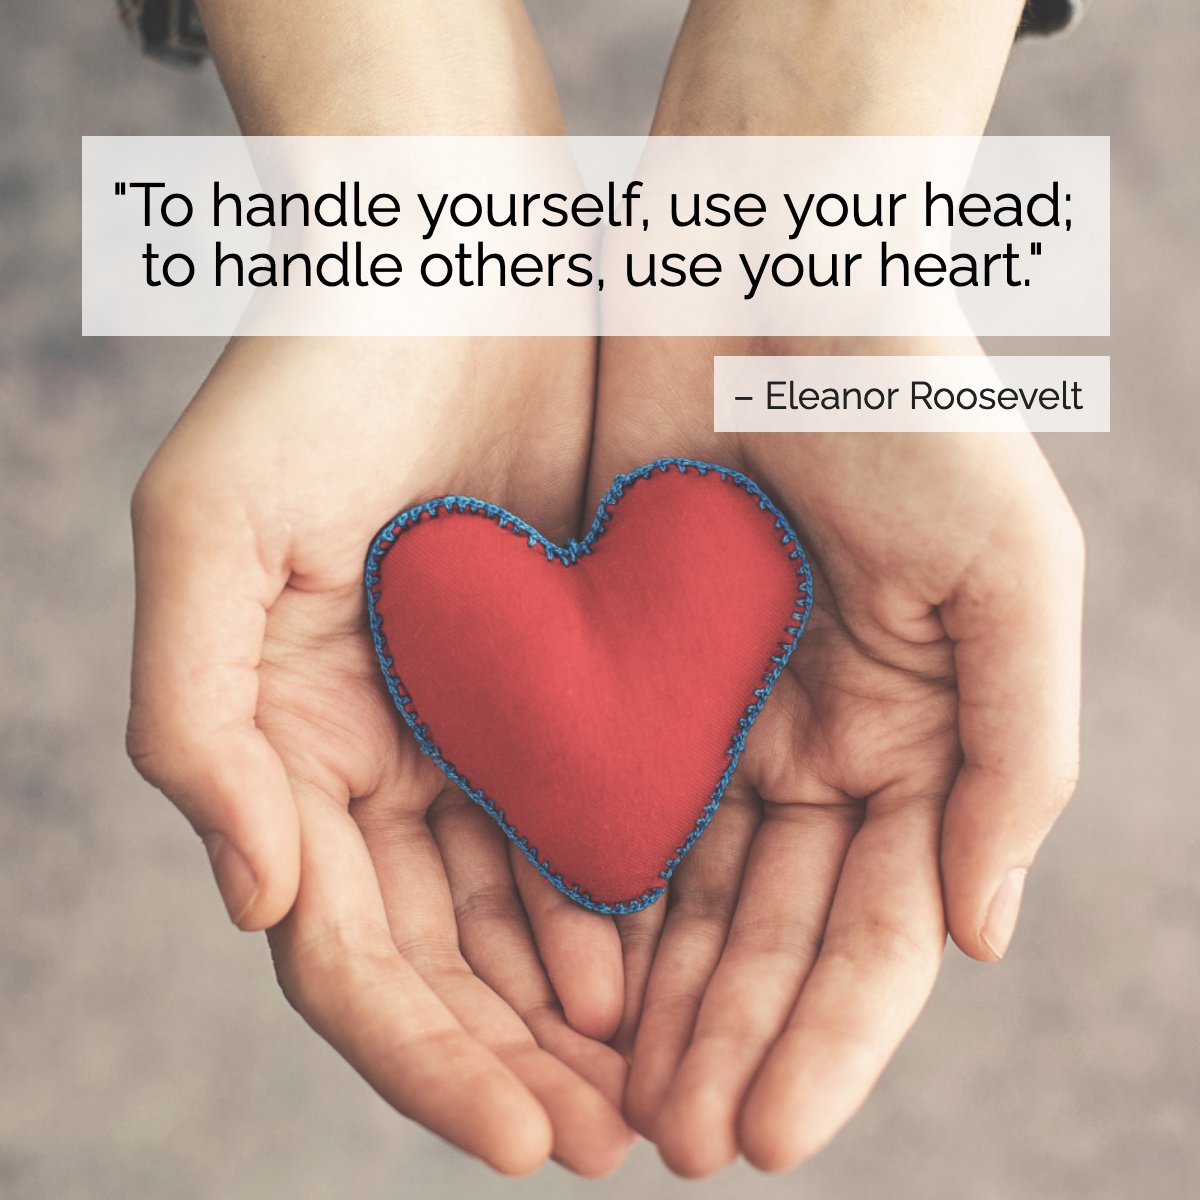 Eleanor Roosevelt was an American political figure, diplomat, and activist. 

She served as the first lady of the United States from 1933 to 1945!

#inspiring #quote #eleanorroosevelt #inspirational 
 #jjsellsfl #jjsellsorlando